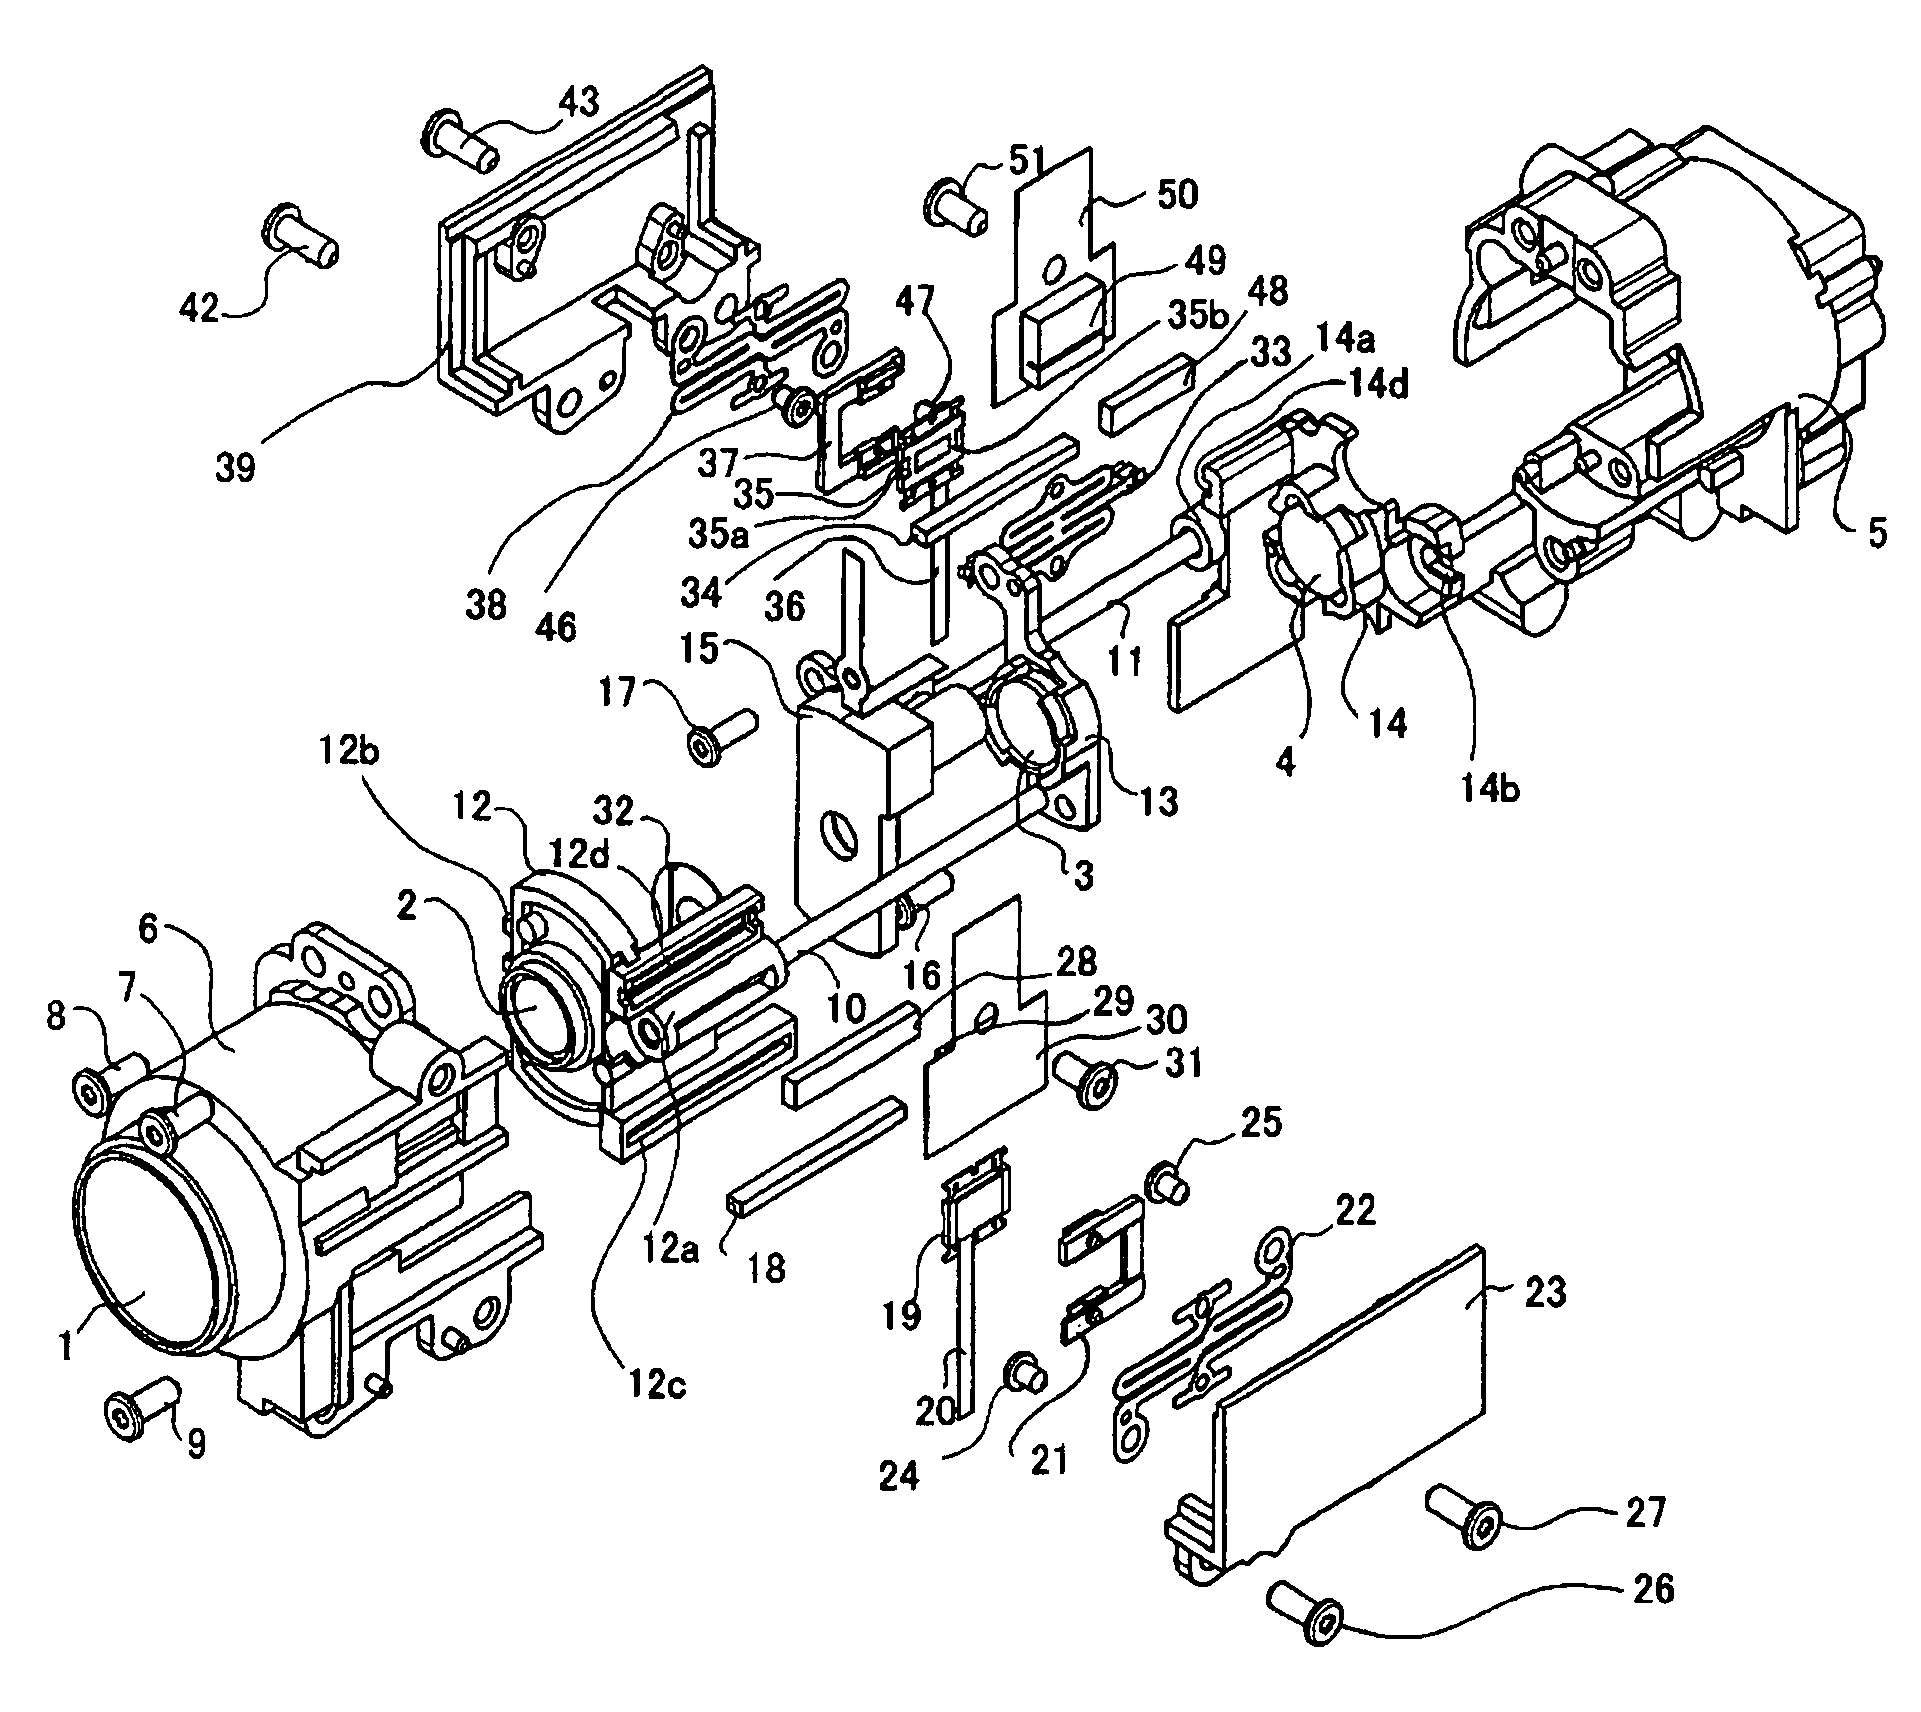 Optical apparatus having a driving source for driving a lens in an optical axis direction